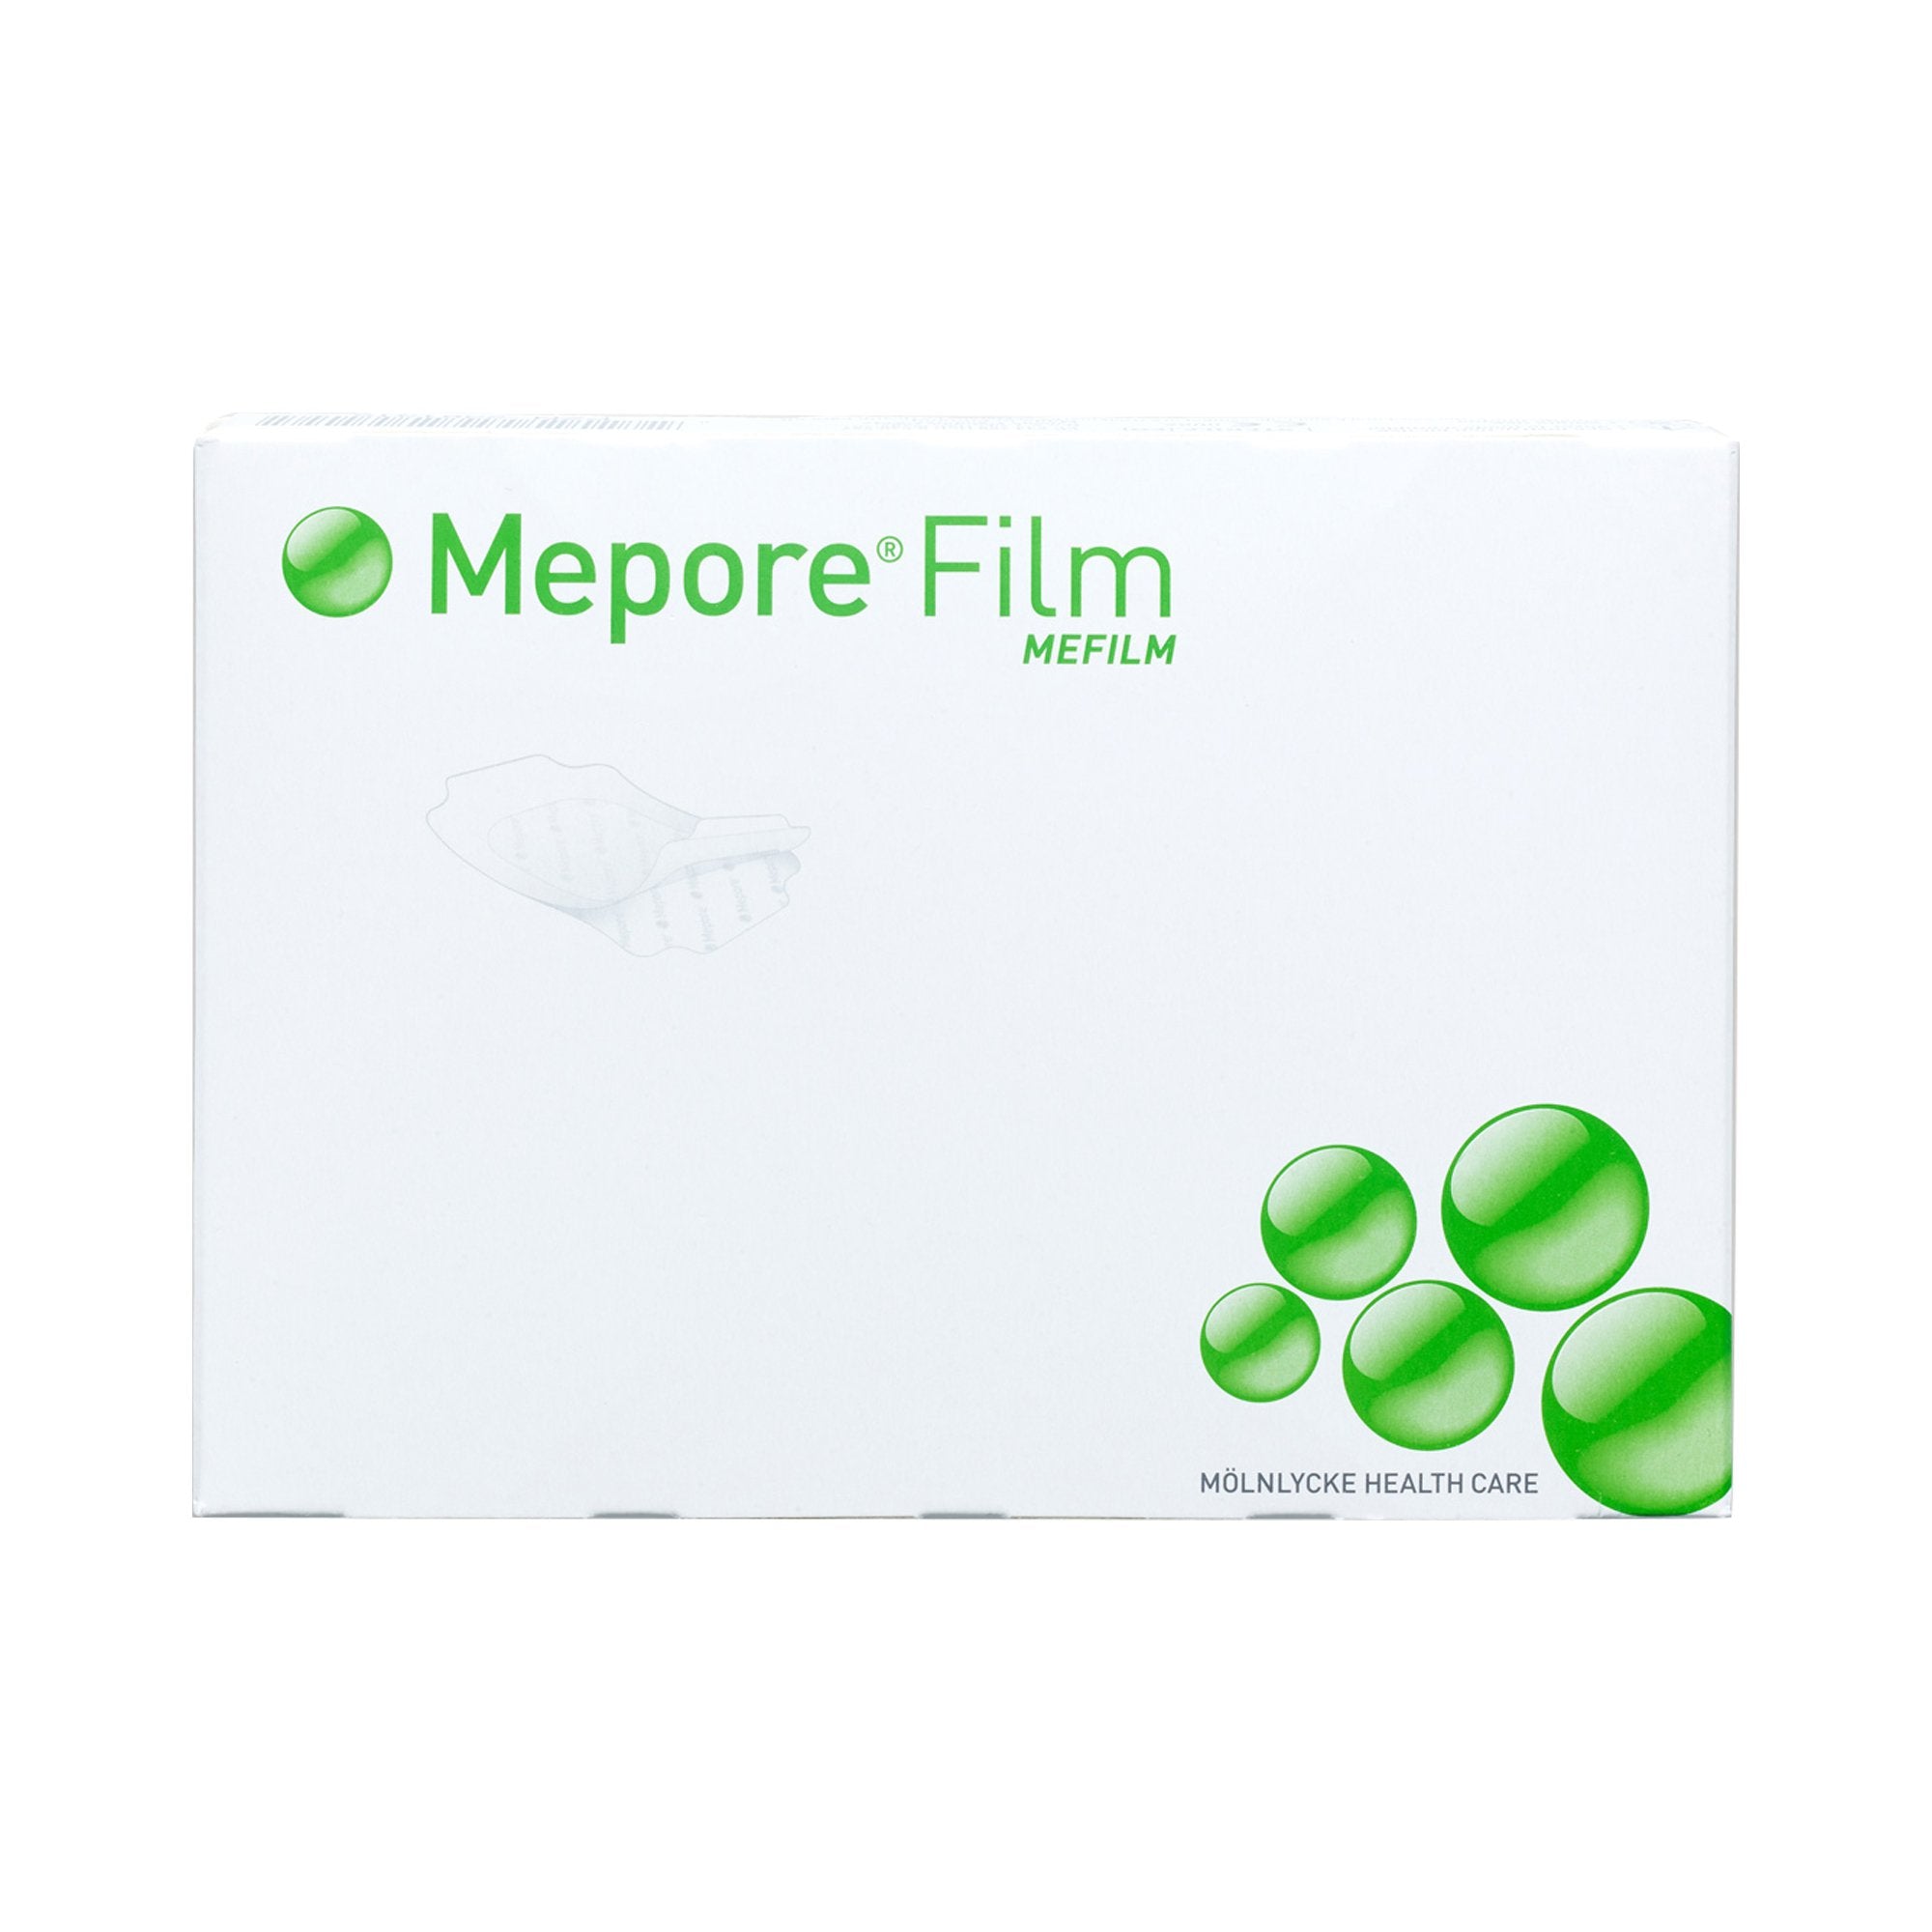 Transparent Film Dressing Mepore® Film 4 X 5 Inch Frame Style Delivery Rectangle Sterile